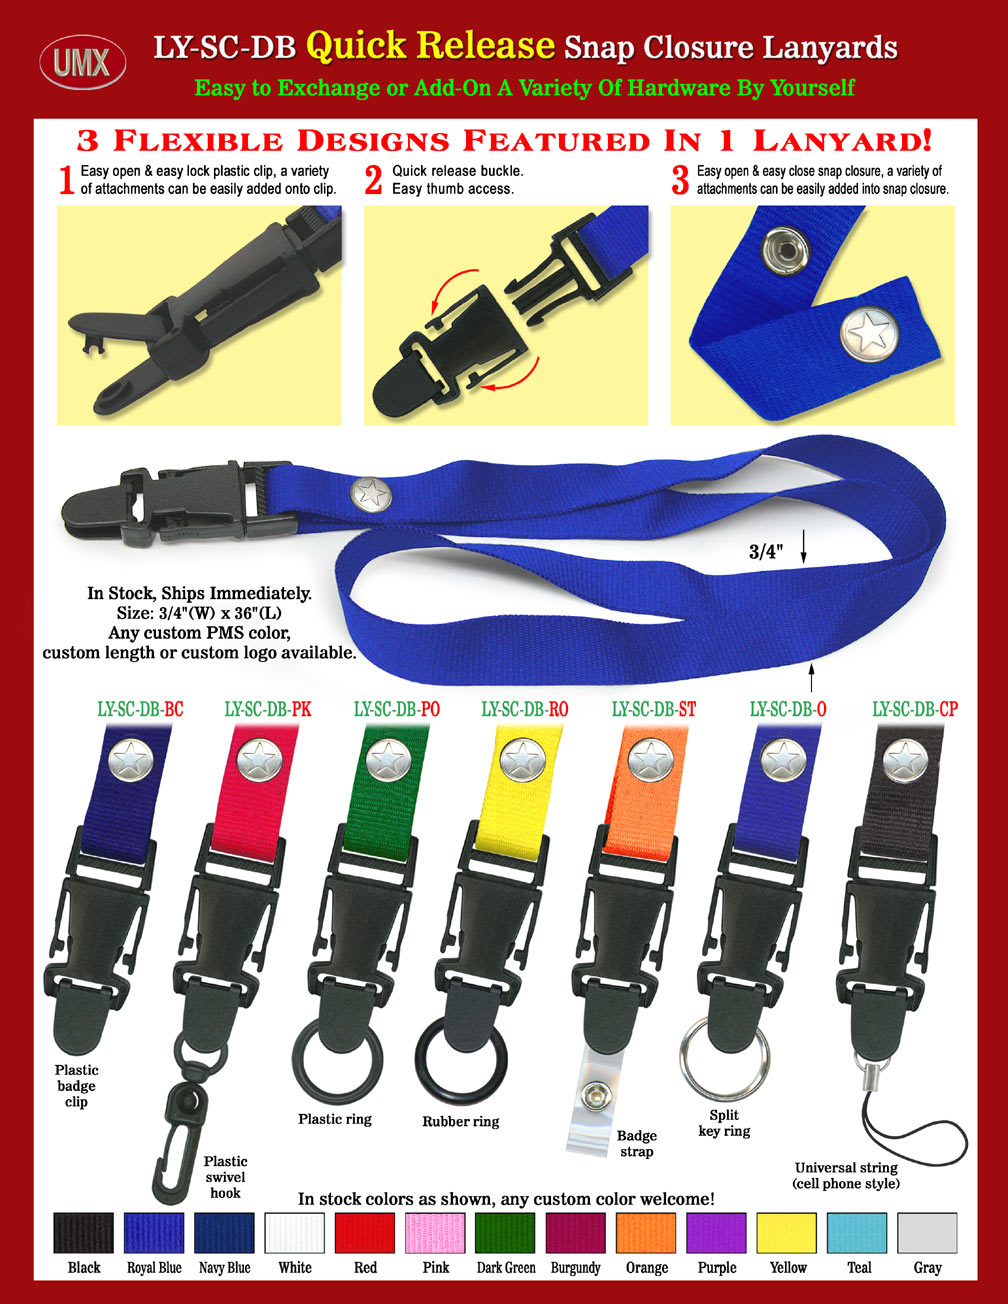 Quick Release Snap Closure Lanyards, there are 3-locations can be easily released and closed for exchanging or add-on different hardware.